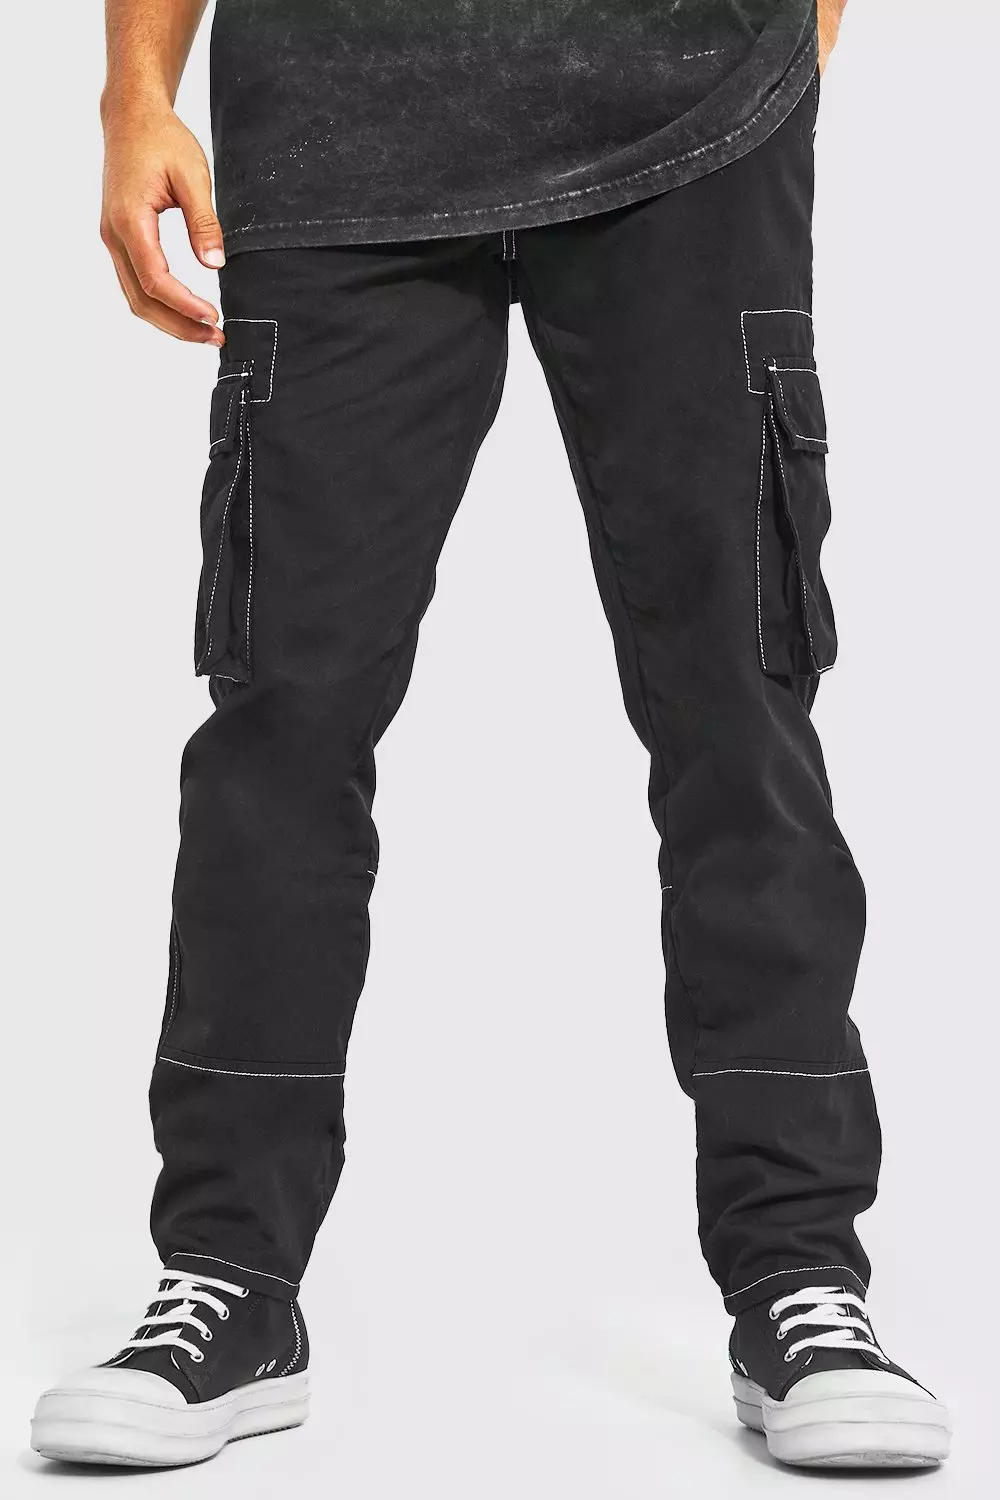 ASOS DESIGN seam detail cargo pants in black with contrast stitch